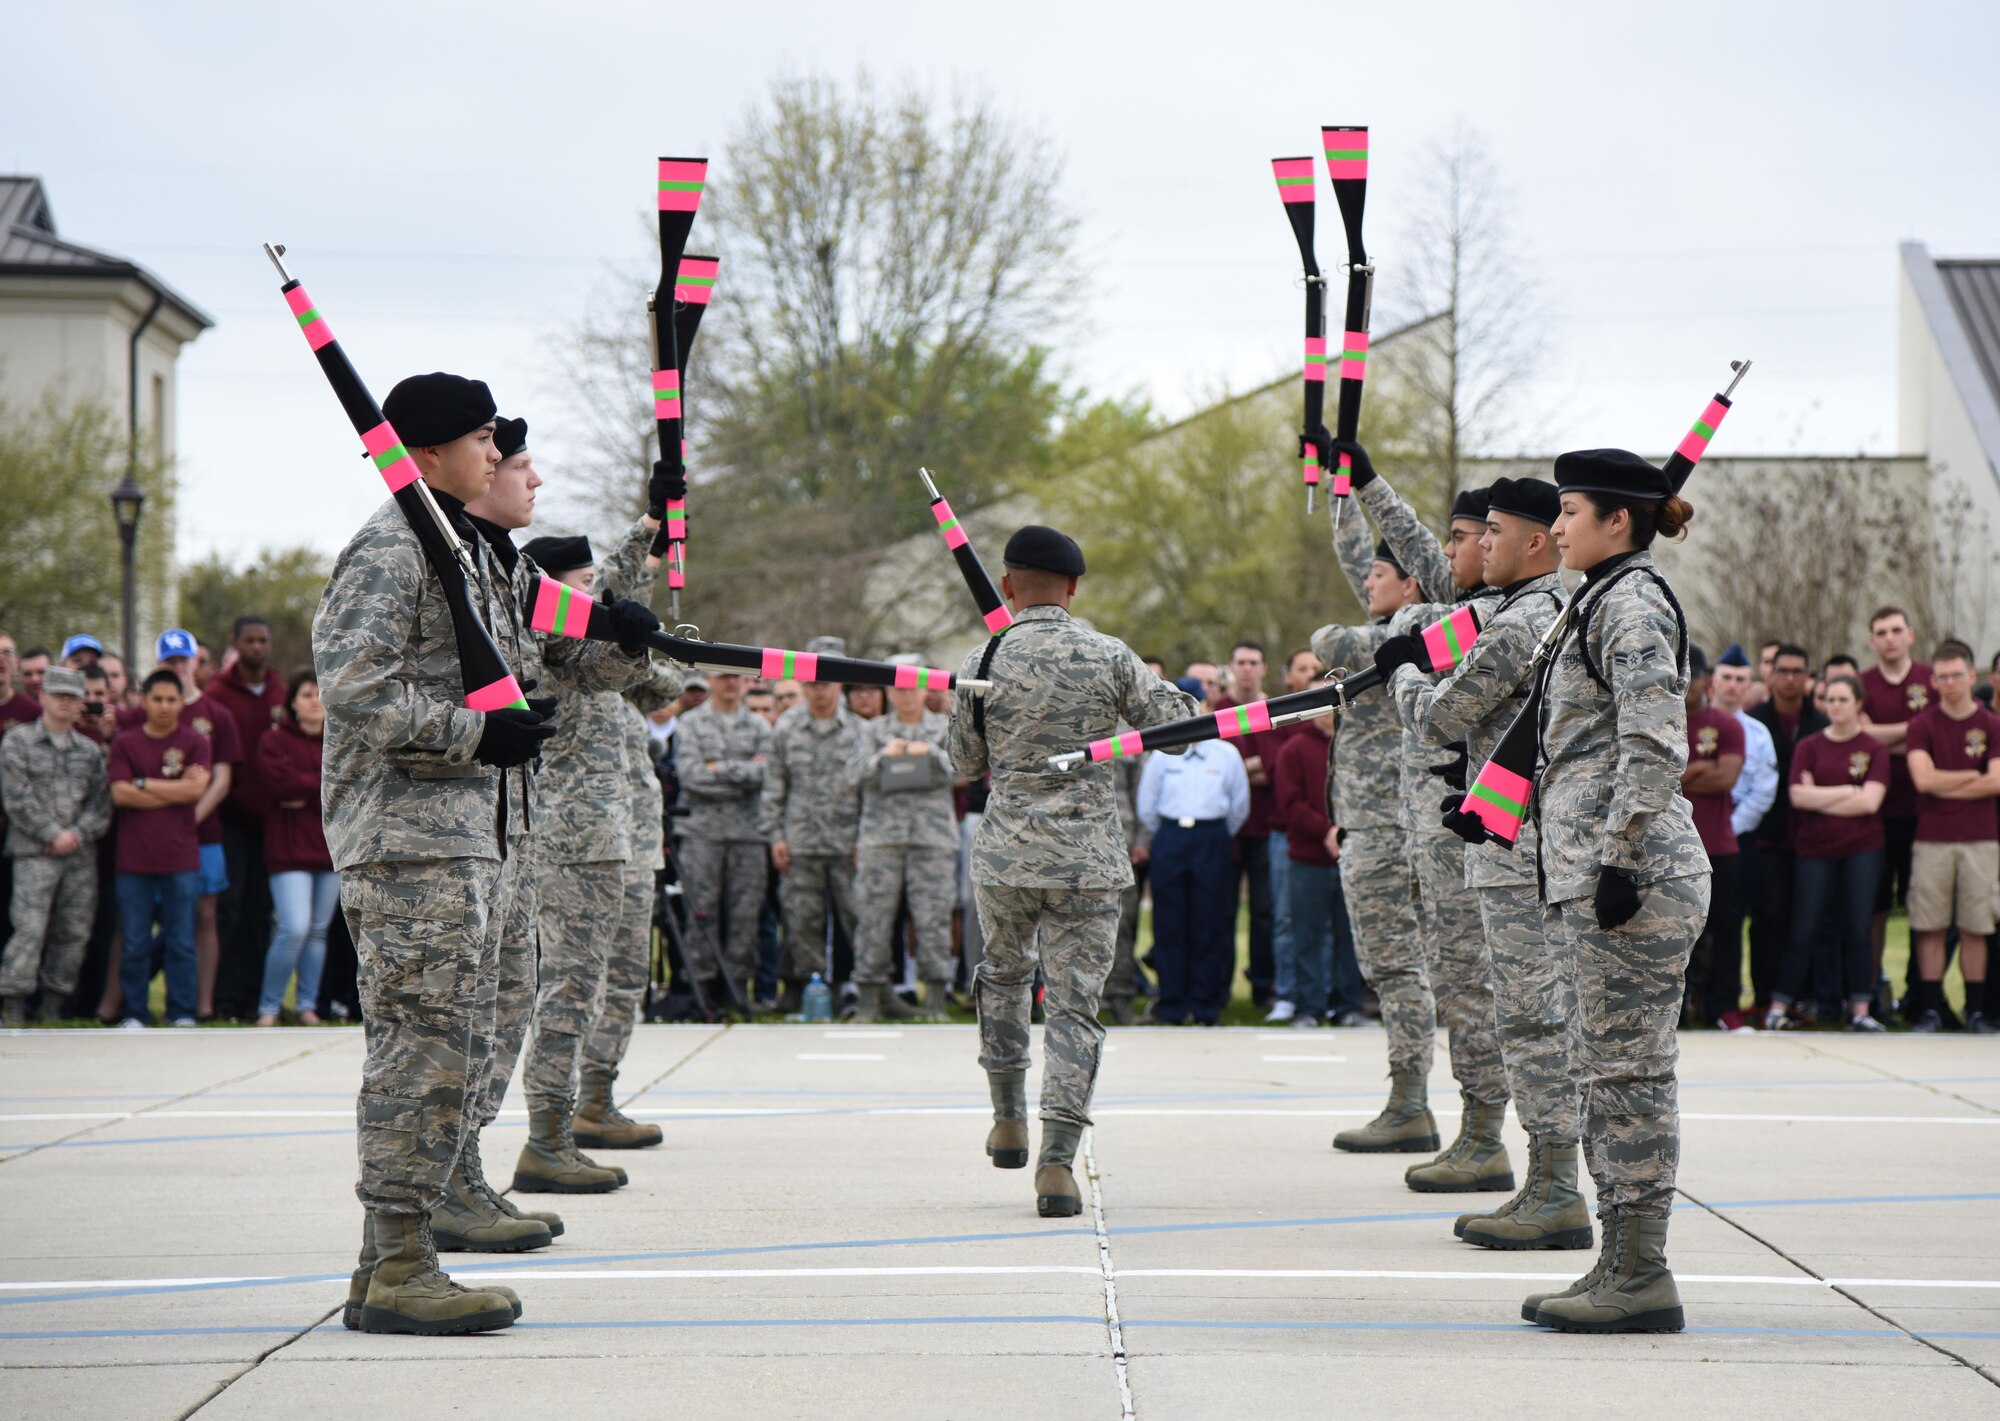 Members of the 334th Training Squadron freestyle drill team perform during the 81st Training Group drill down at the Levitow Training Support Facility drill pad March 10, 2017, on Keesler Air Force Base, Miss. Airmen from the 81st TRG competed in a quarterly open ranks inspection, regulation drill routine and freestyle drill routine with the 334th TRS “Gators” taking first place. (U.S. Air Force photo by Kemberly Groue)